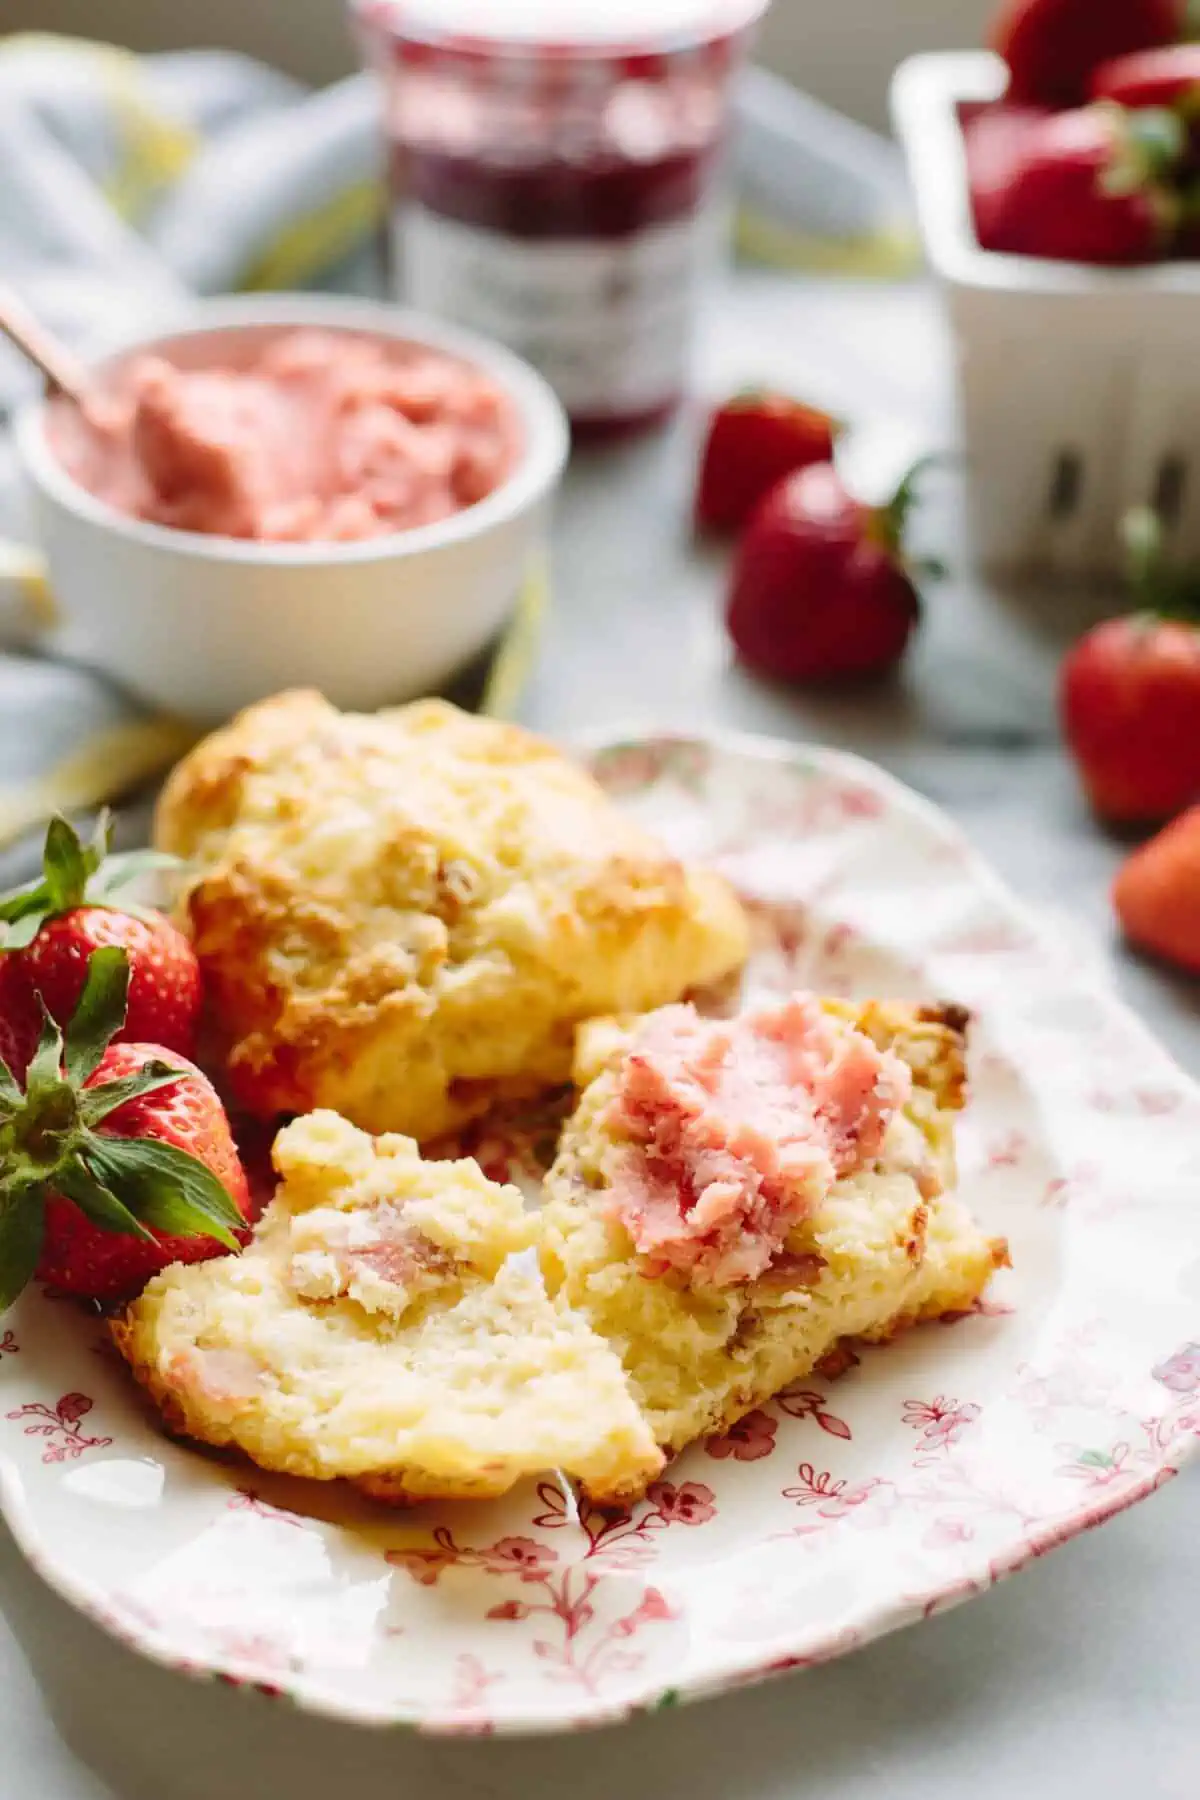 A whole scone and one split open and spread with butter on a small plate with whole strawberries.